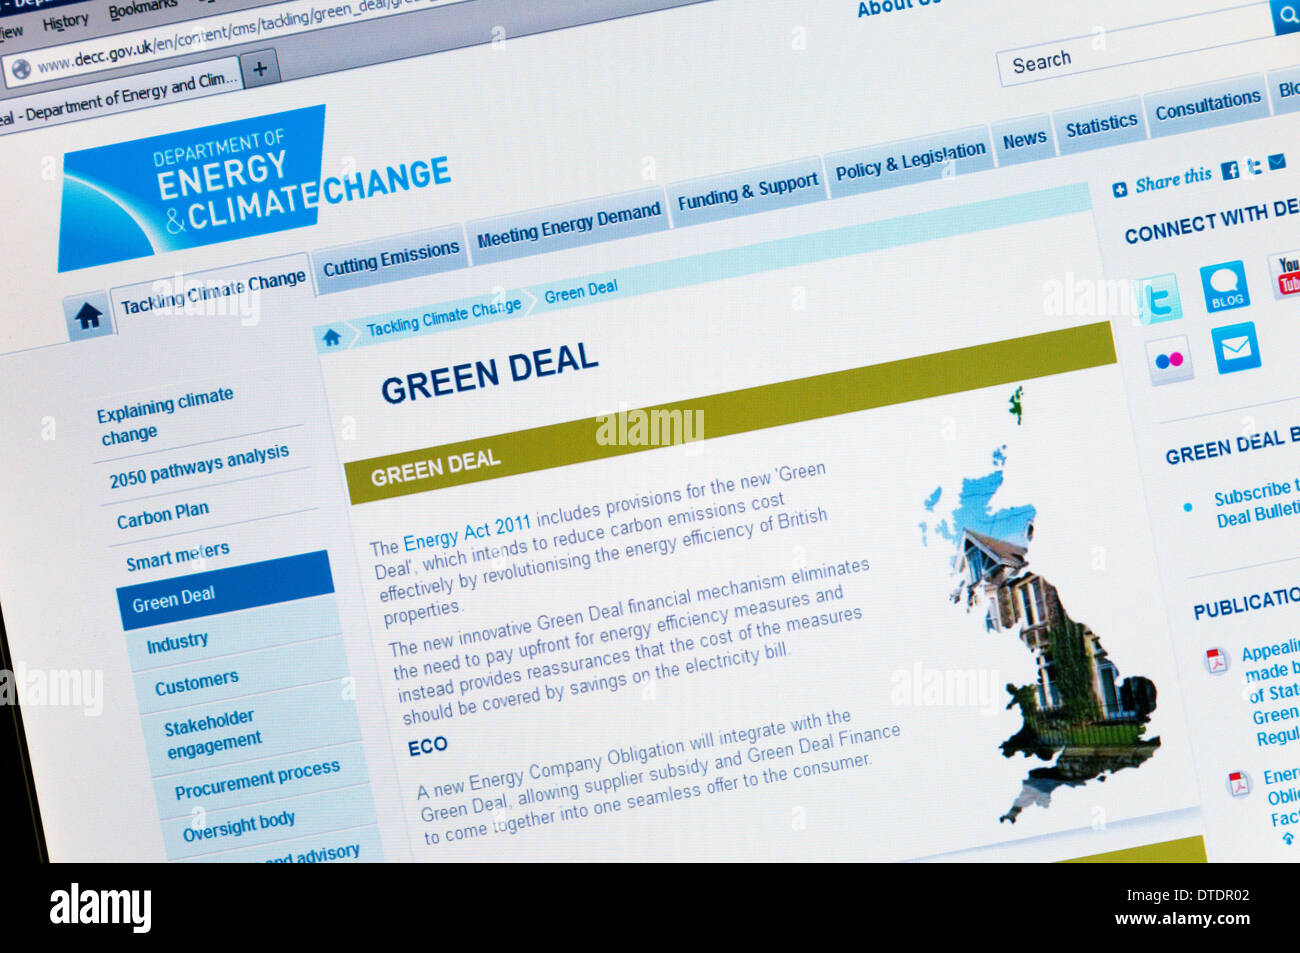 The web site of the UK Department of Energy & Climate Change showing details of the Government's Green Deal. Stock Photo